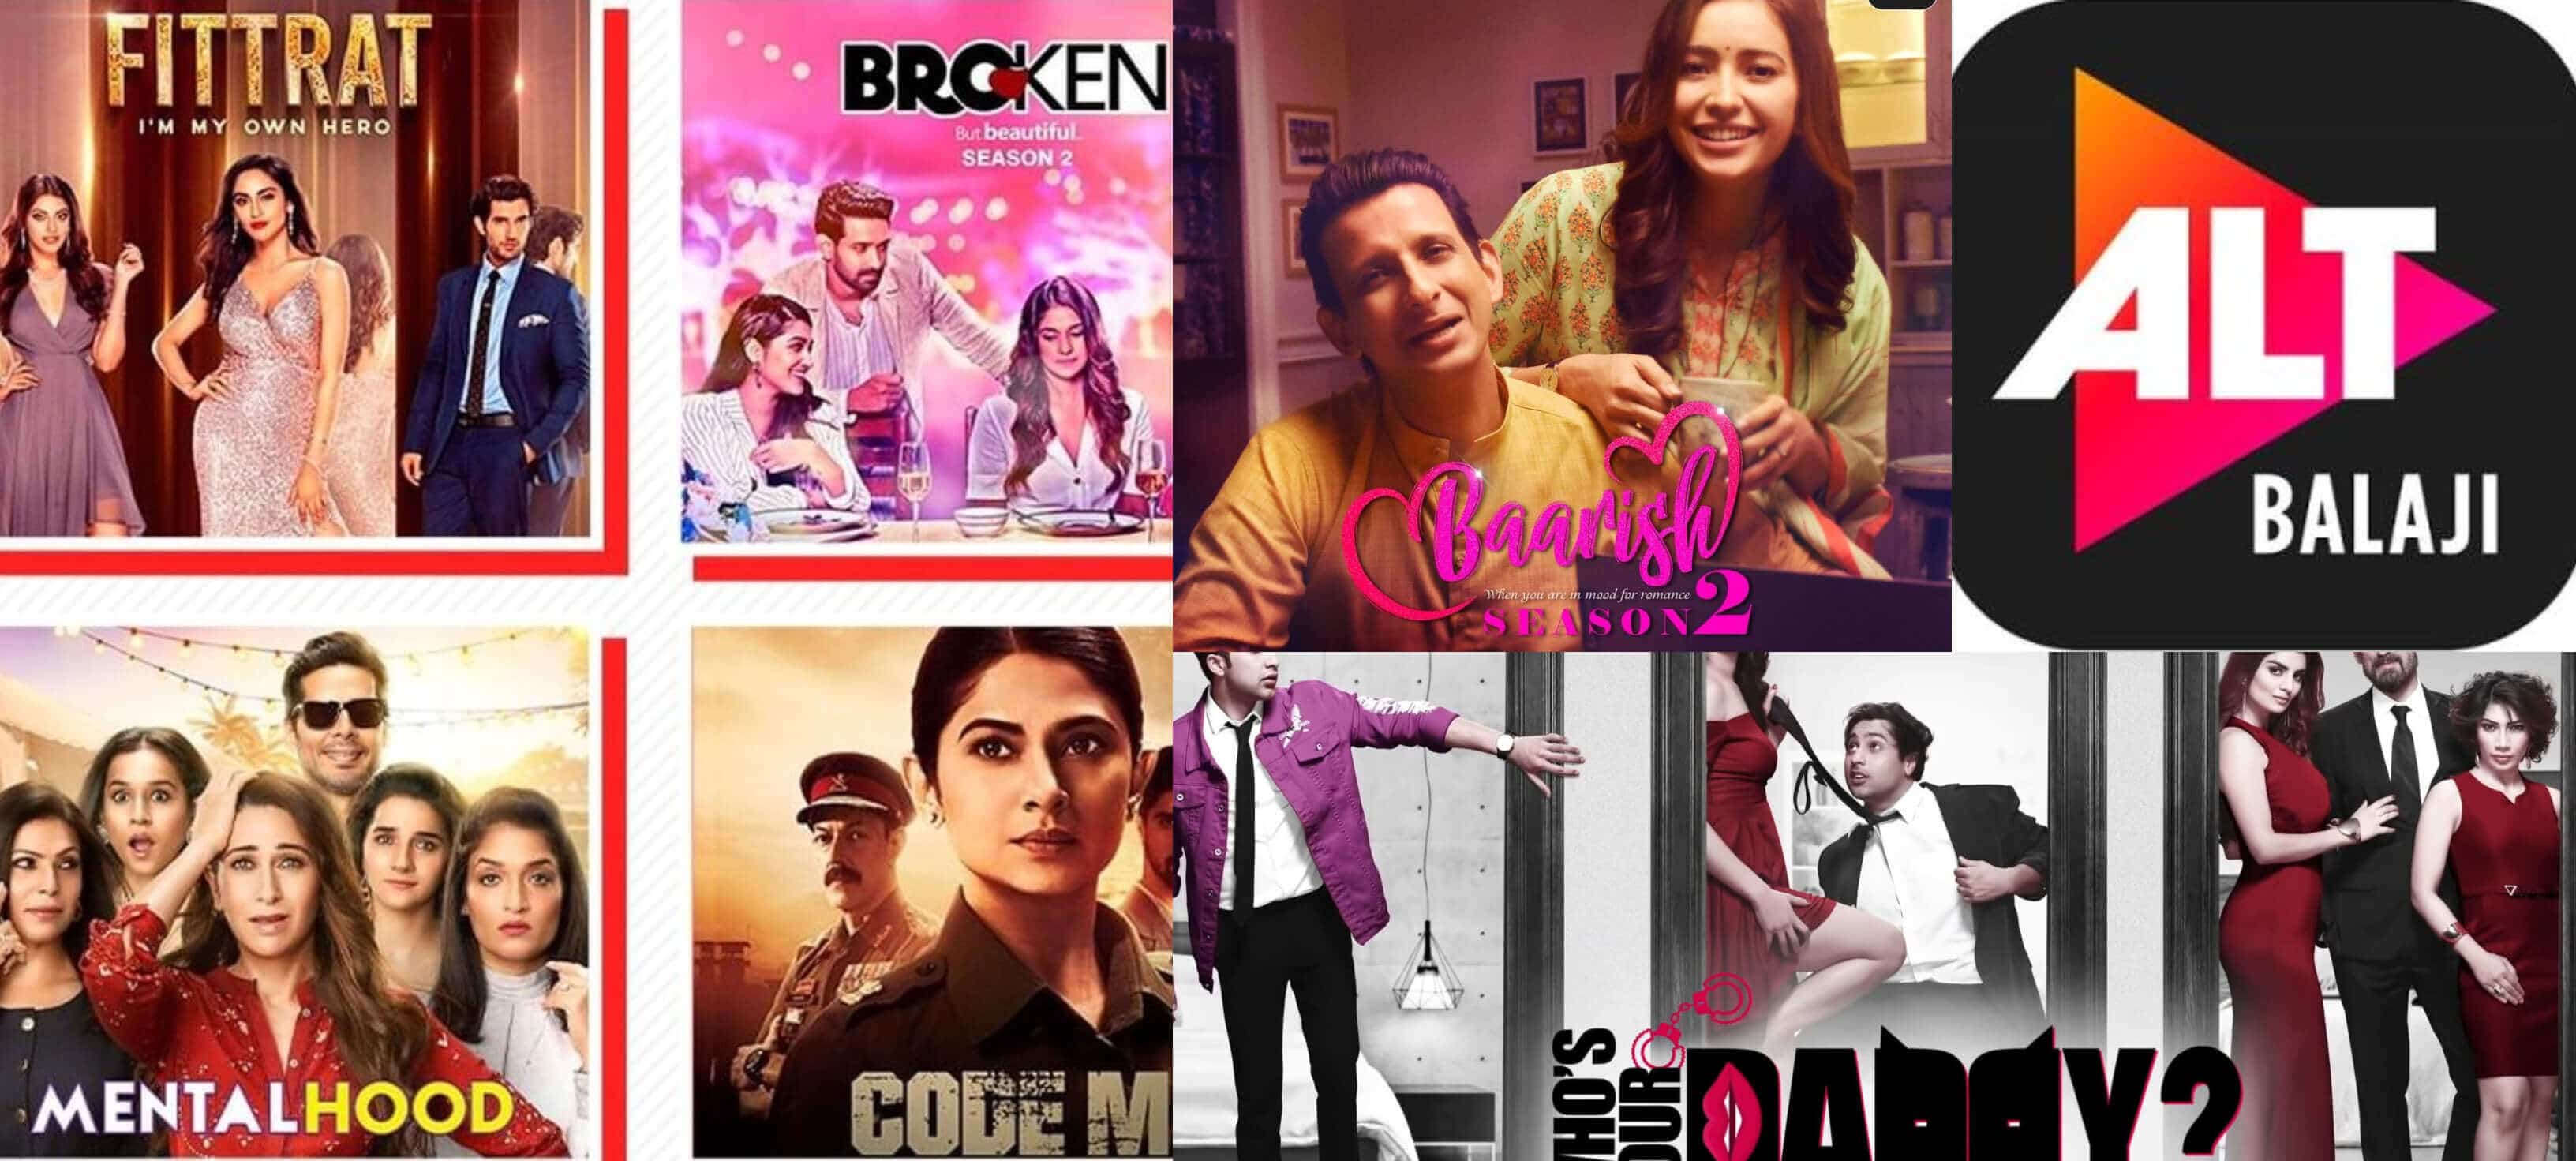 Watch Alt Balaji web series and shows free Online without Subscription